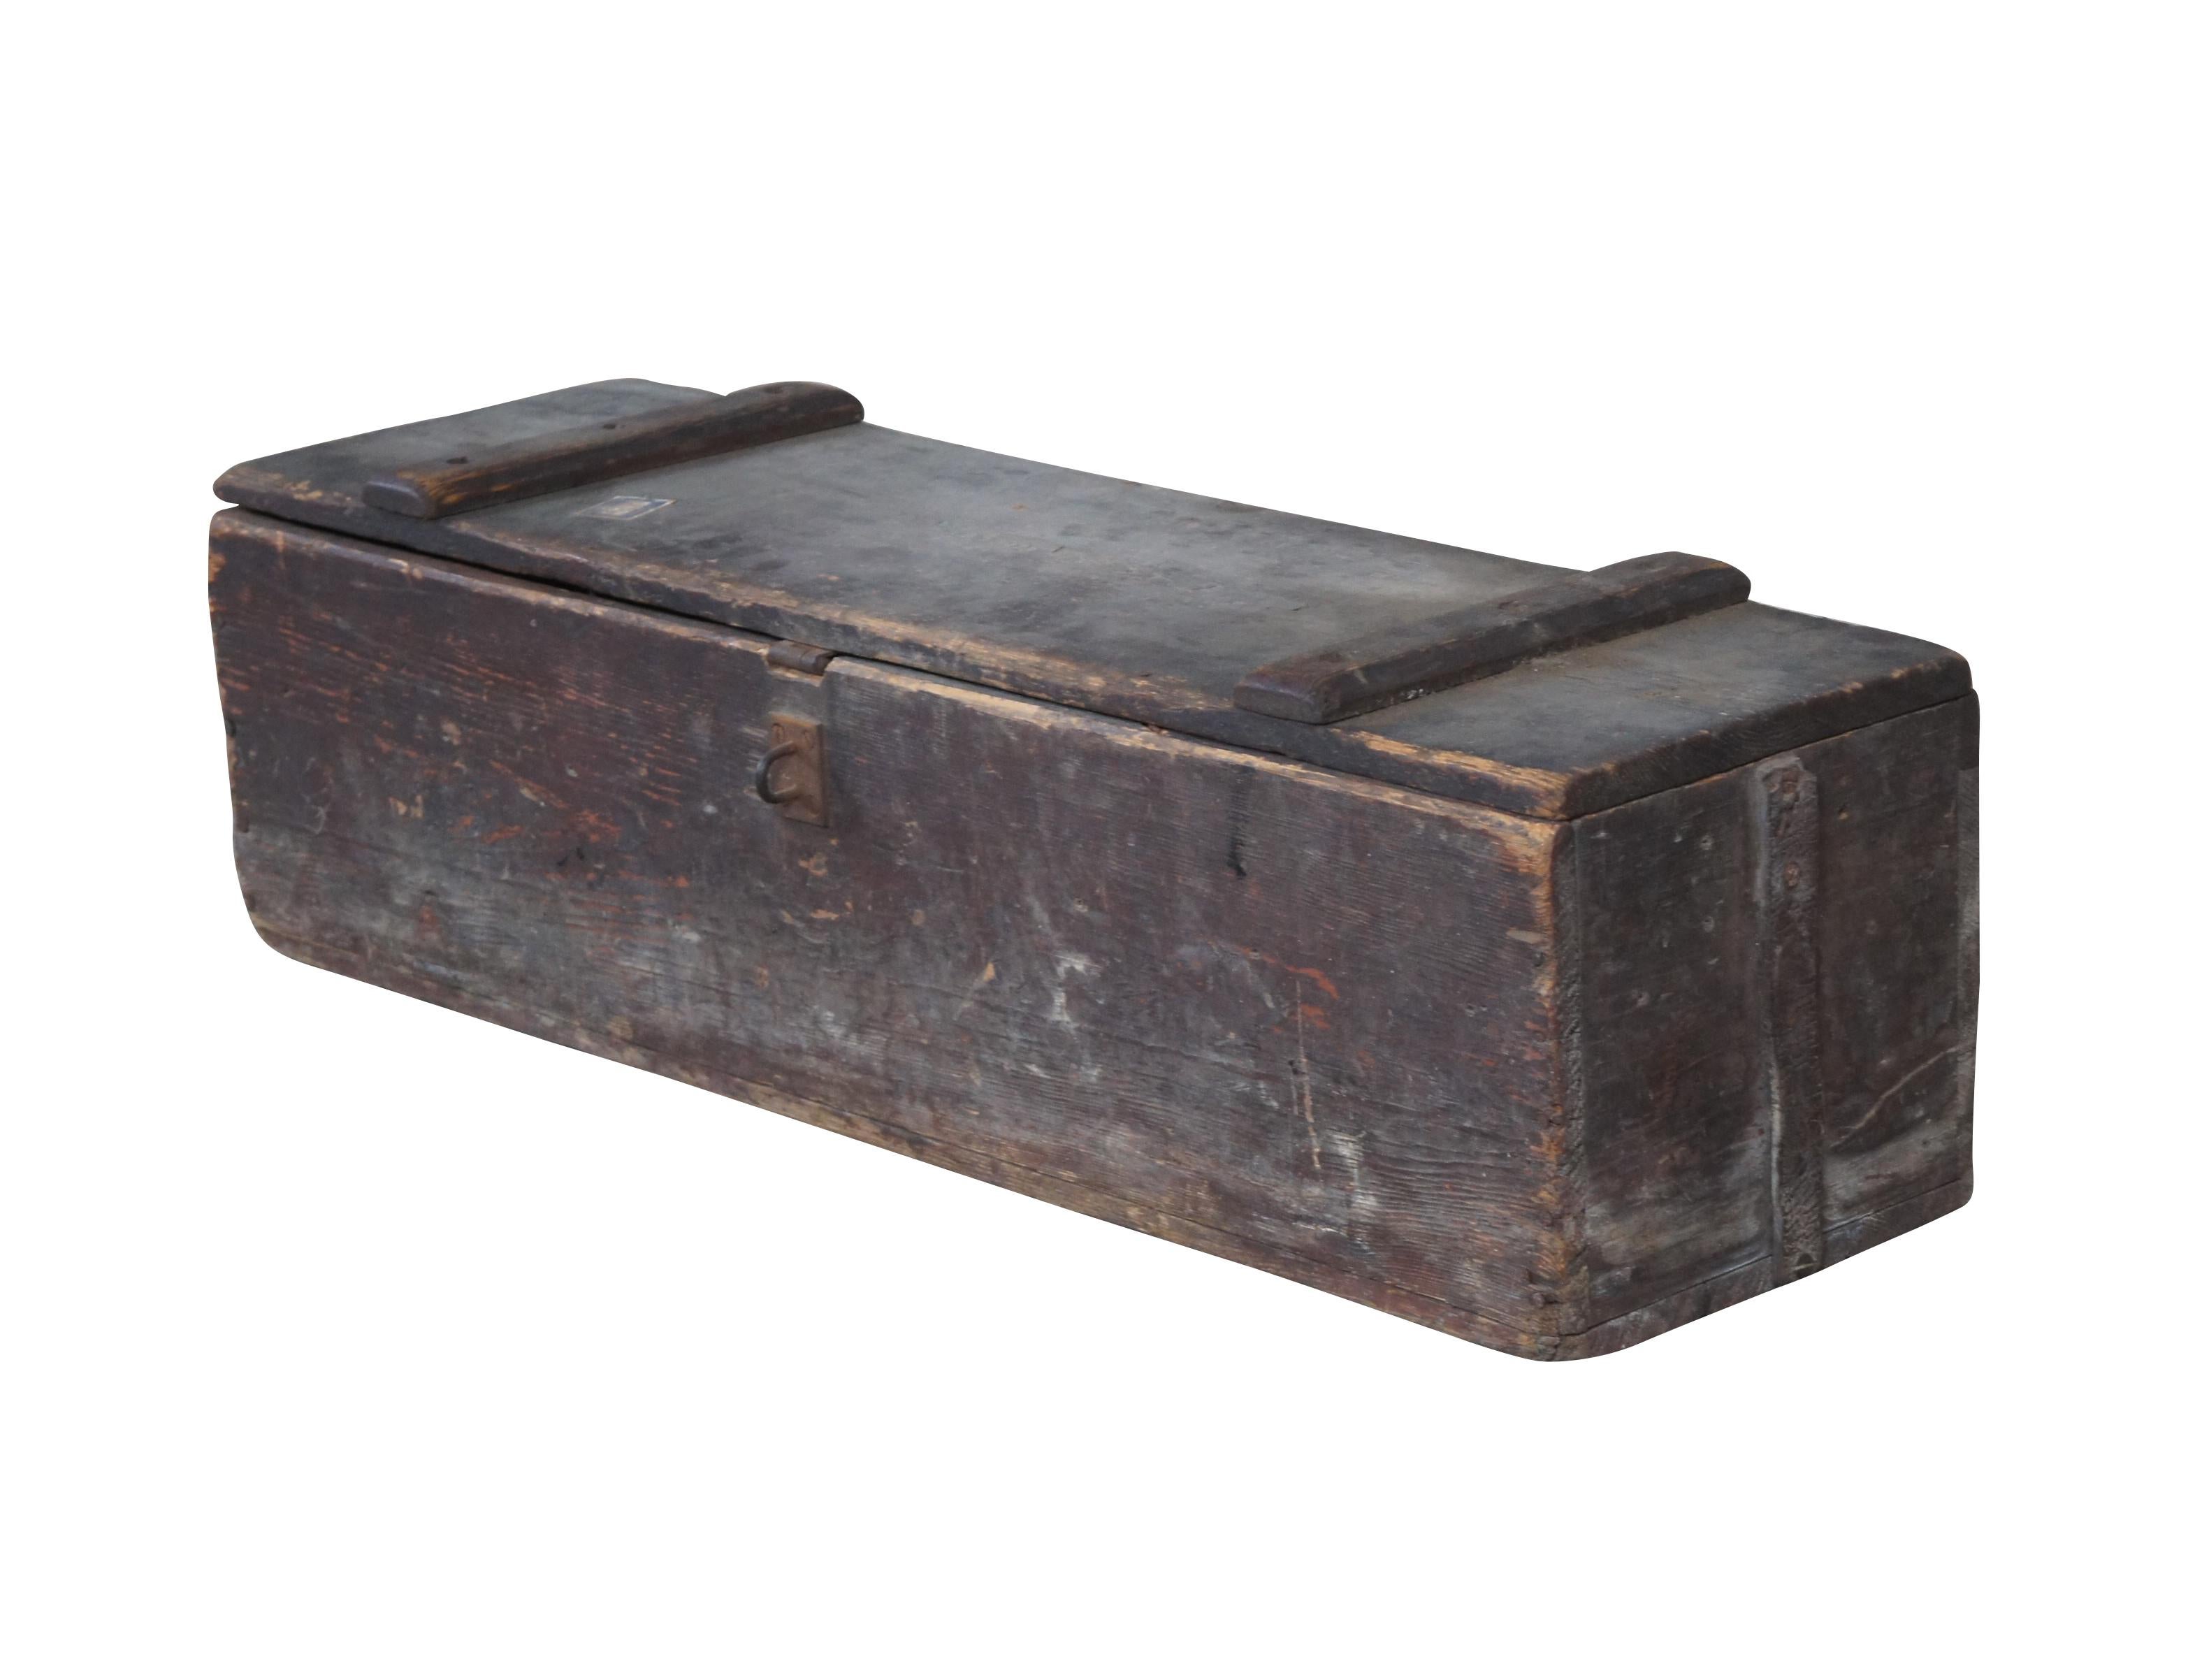 An antique tool box. Made from pine with iron hardware. Size: 32